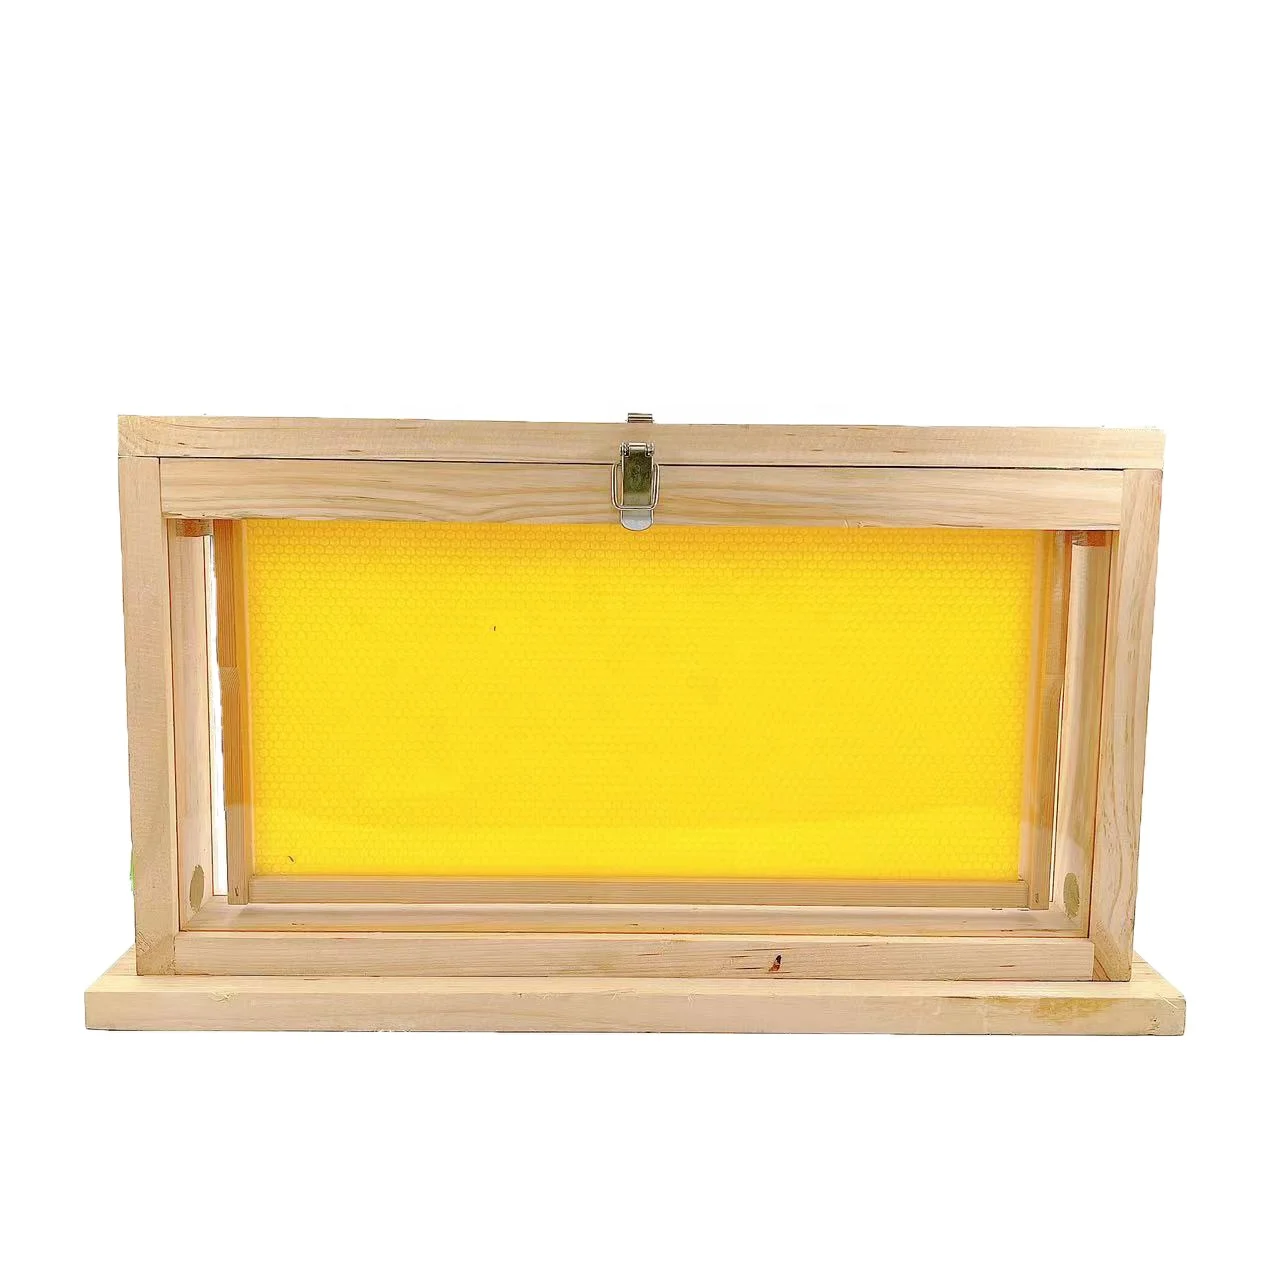 

BAQIAN New Beekeeping Tools Wood Beehive Box Hive for Bee Observation Beehive